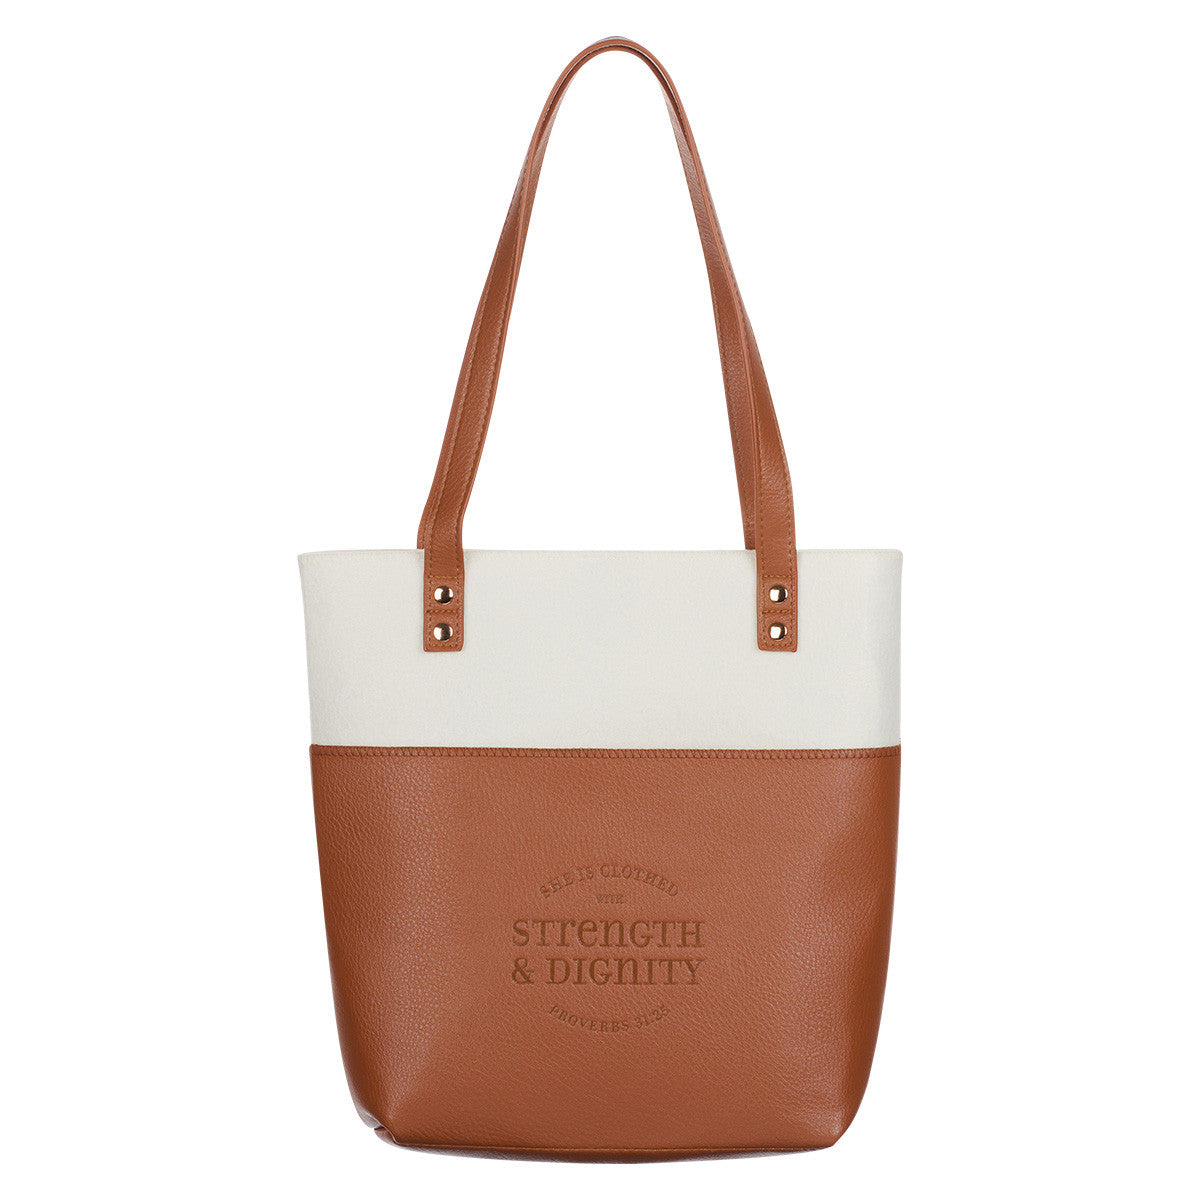 Strength & Dignity Two-tone Toffee and Cream Felt Fashion Bible Tote Bag - Proverbs 31:25